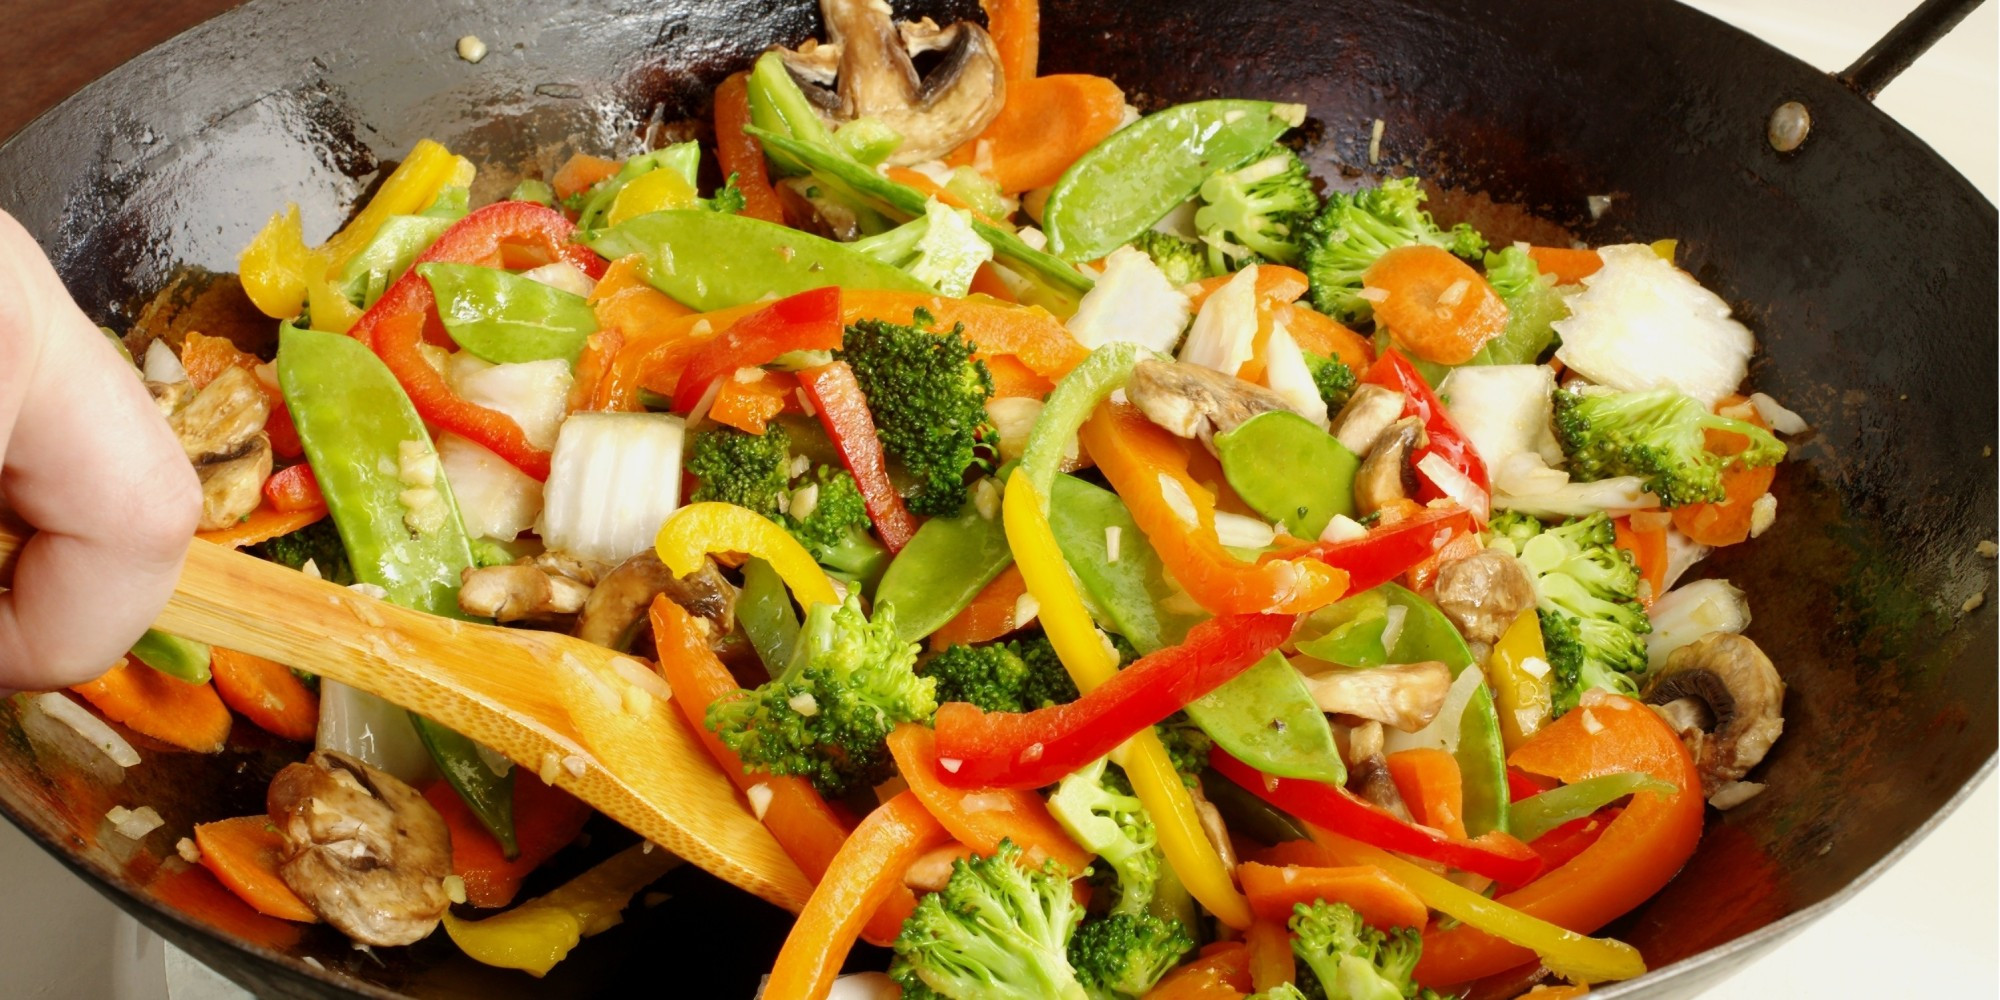 Asian Stir Fry Recipes
 Better Than Take Out 5 Easy Asian Stir Fry Recipes